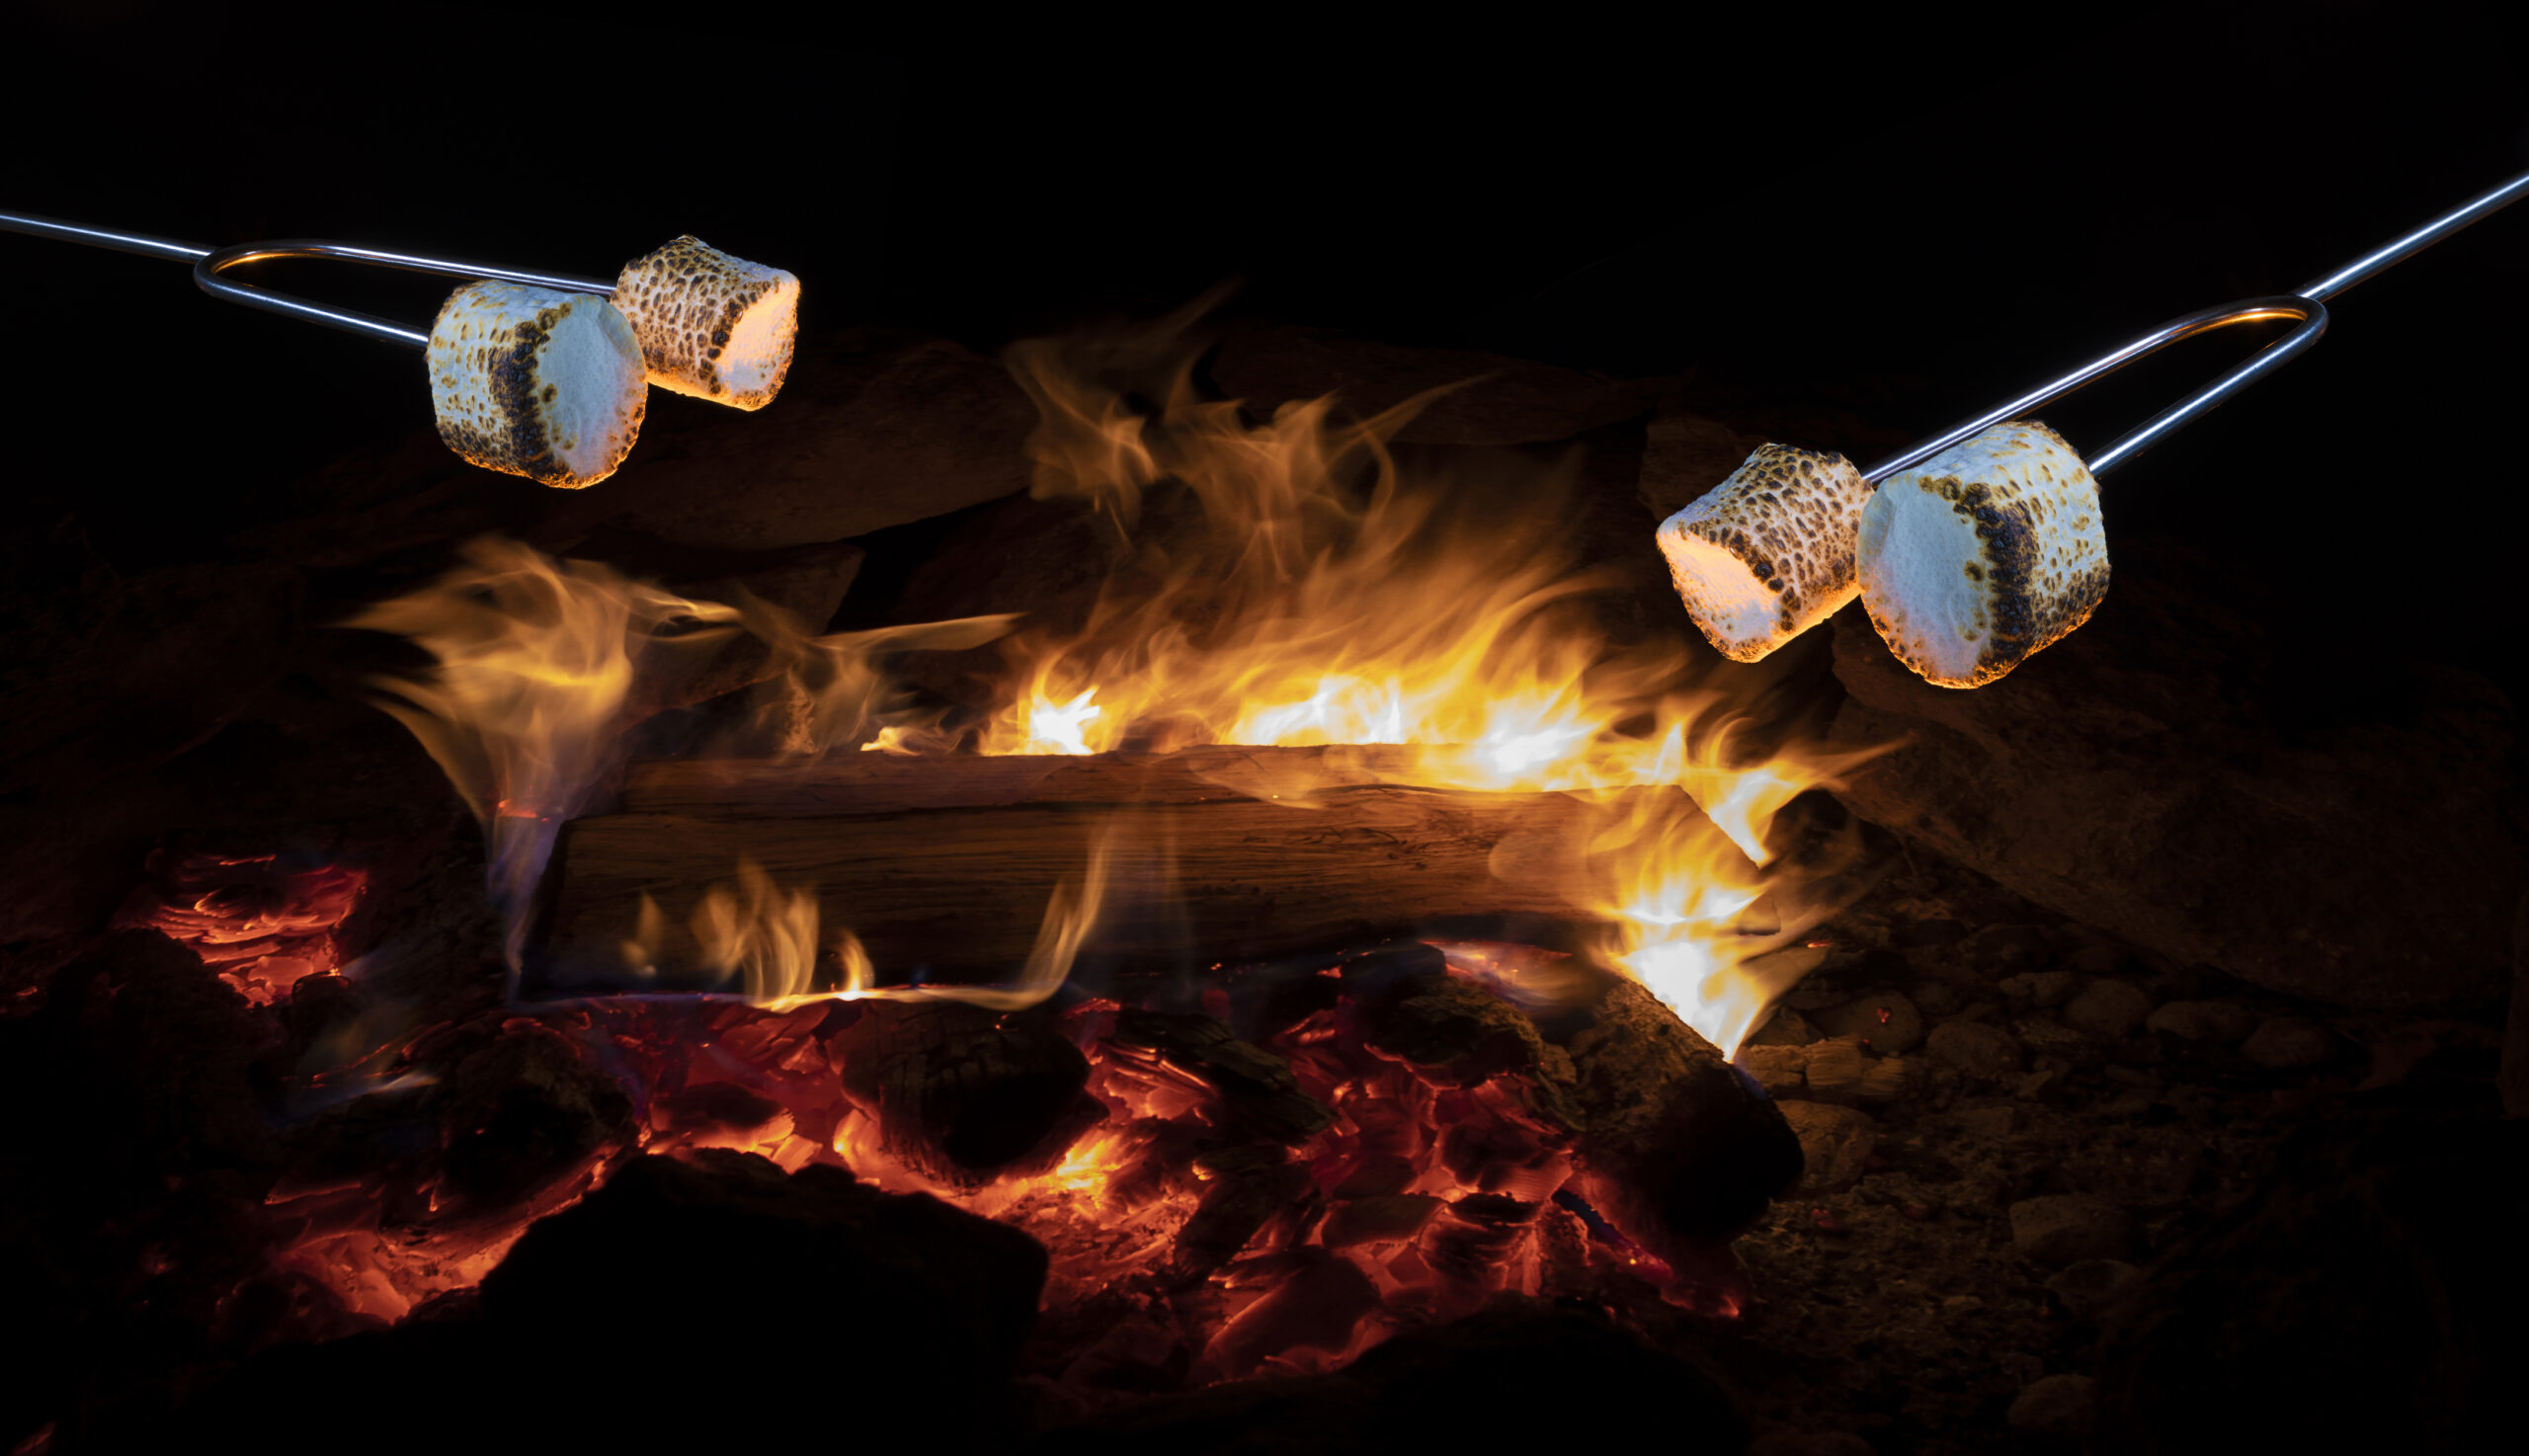 Pair of skewers with marshmallows being roasted over a warm open fire outdoors at night